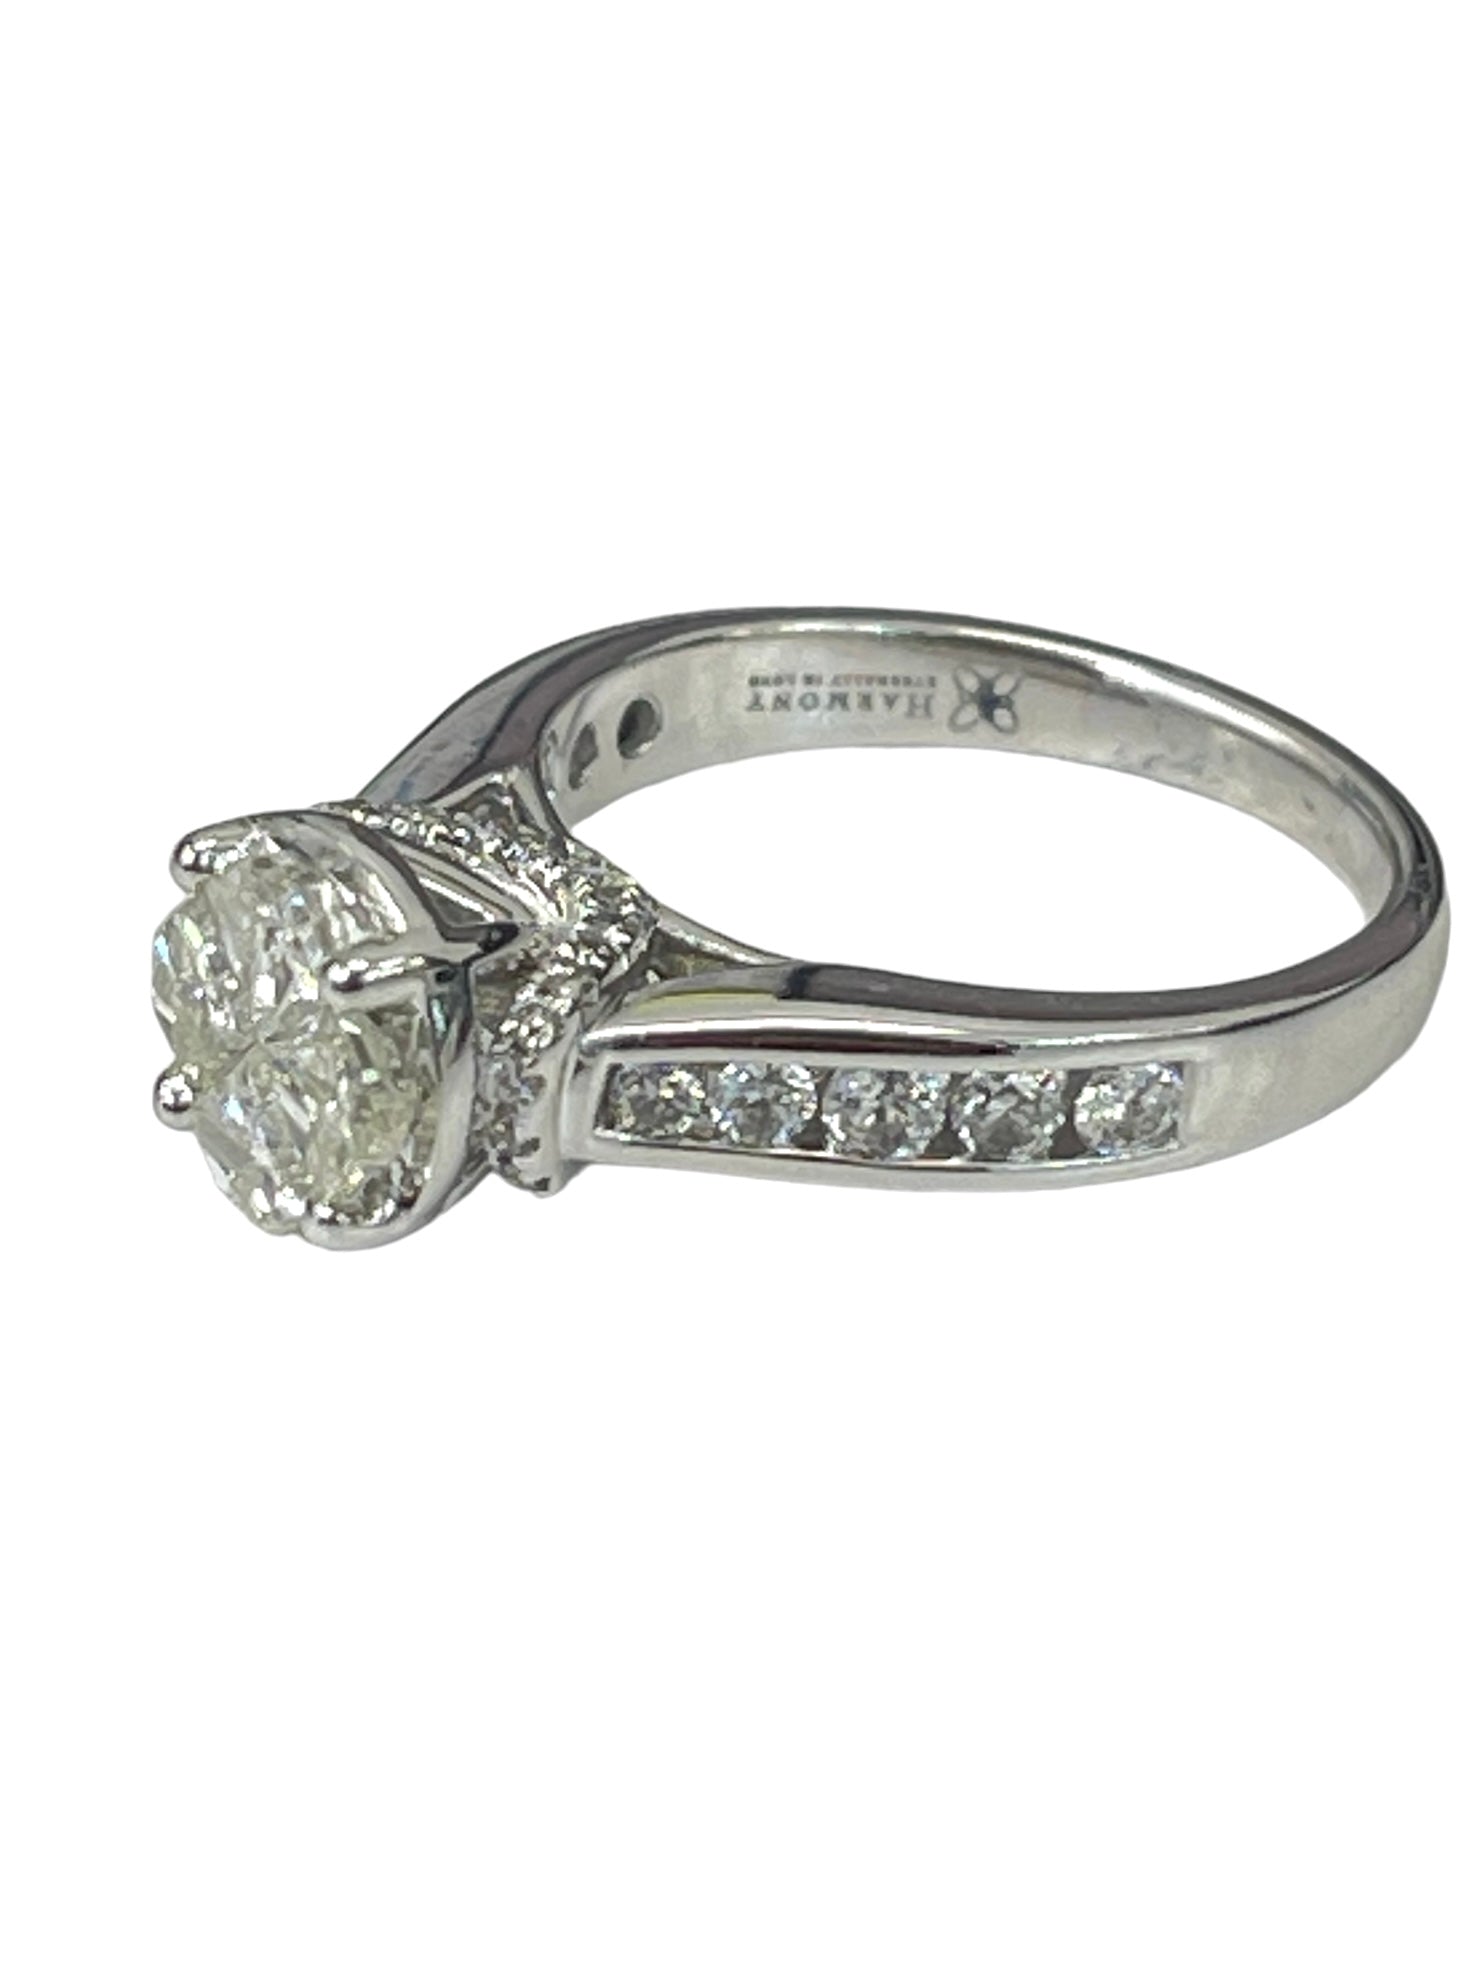 Shield Cut Special Diamond Cluster Ring White Gold 14kt